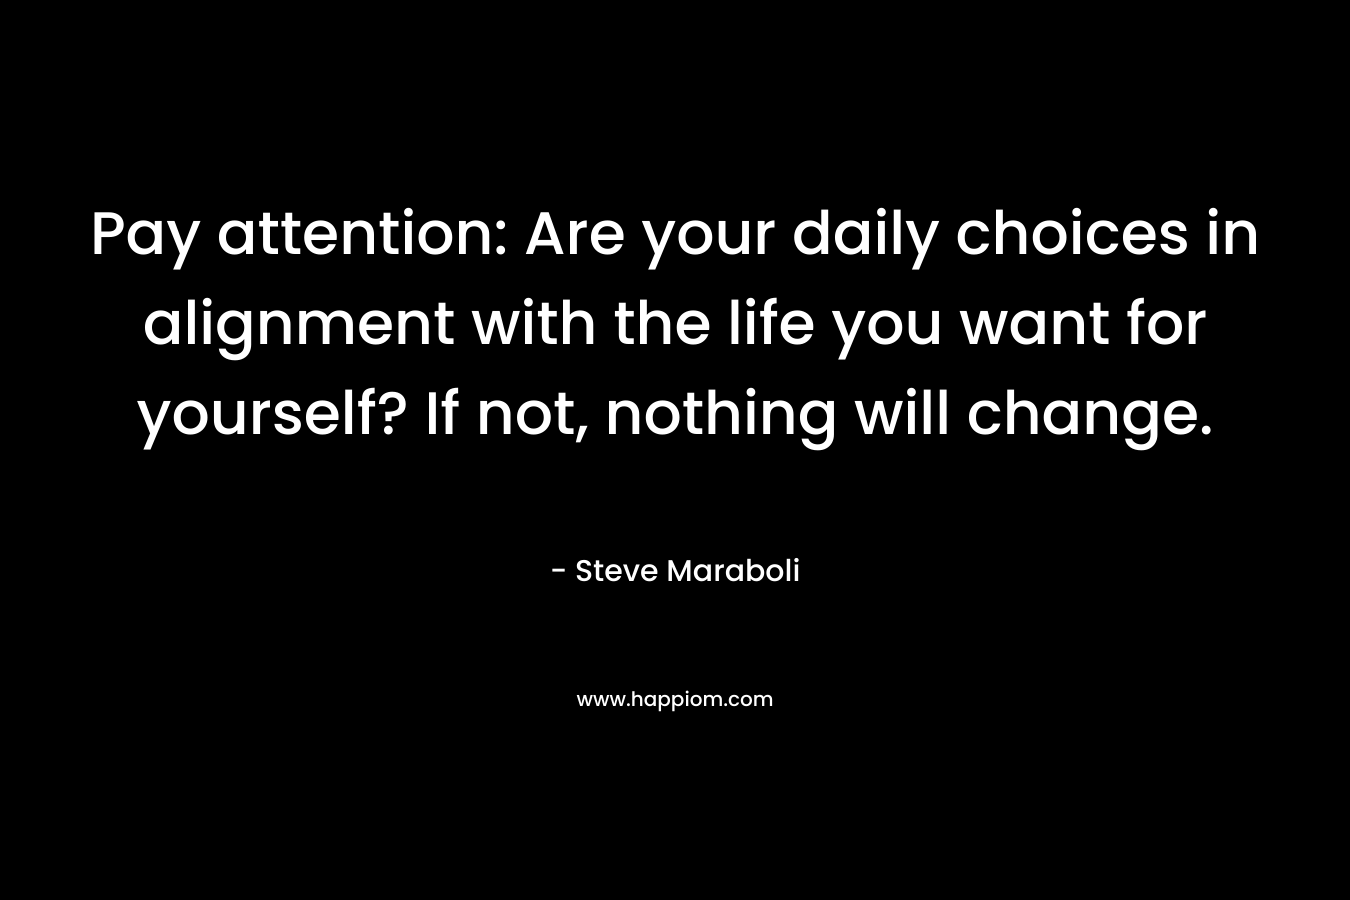 Pay attention: Are your daily choices in alignment with the life you want for yourself? If not, nothing will change. – Steve Maraboli